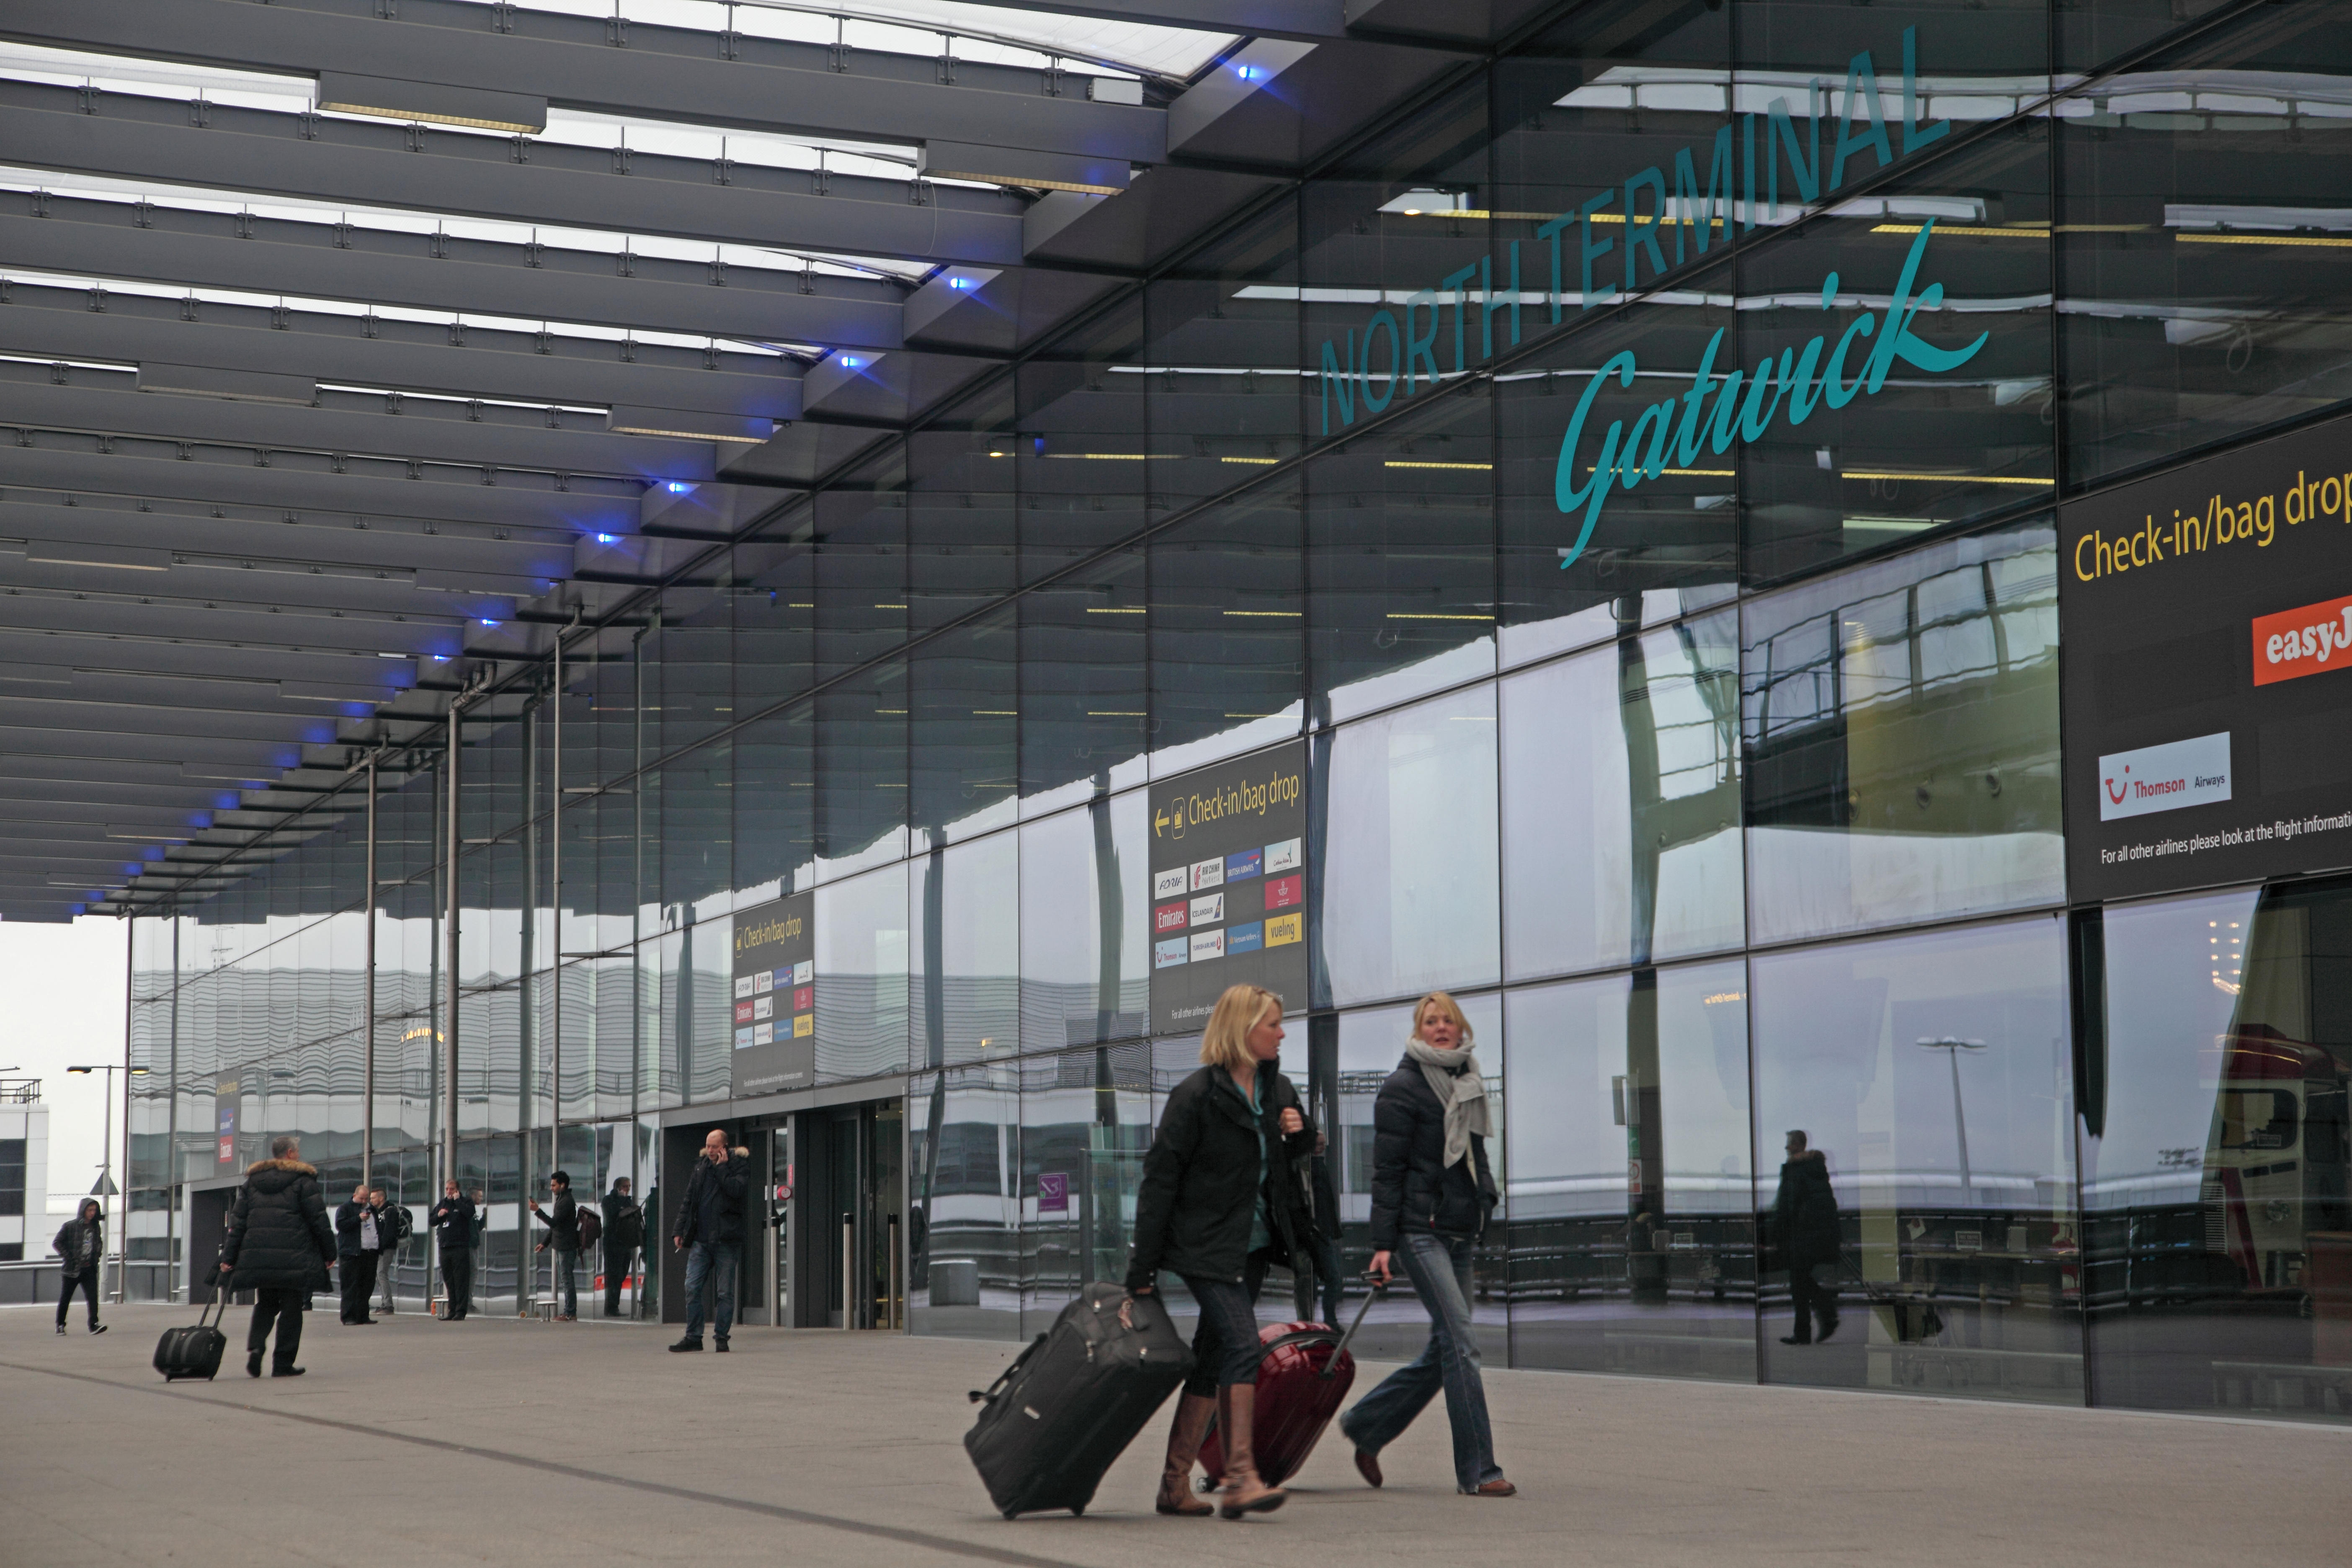 More than 300 Gatwick Airport staff are to go on strike next month